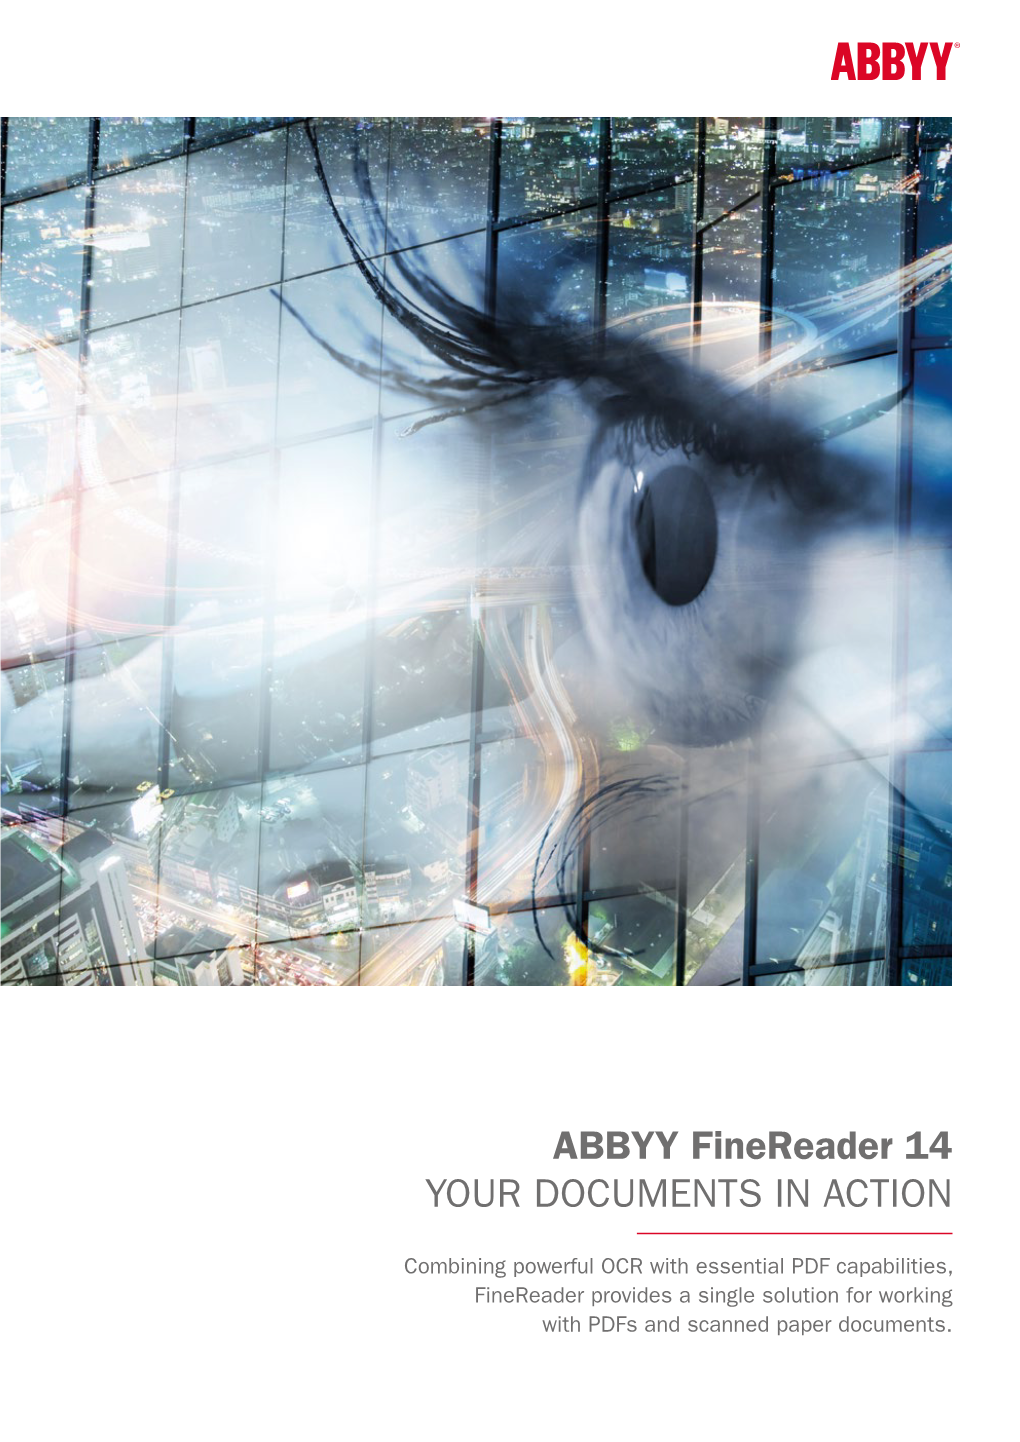 ABBYY Finereader 14 – Your Documents in Action